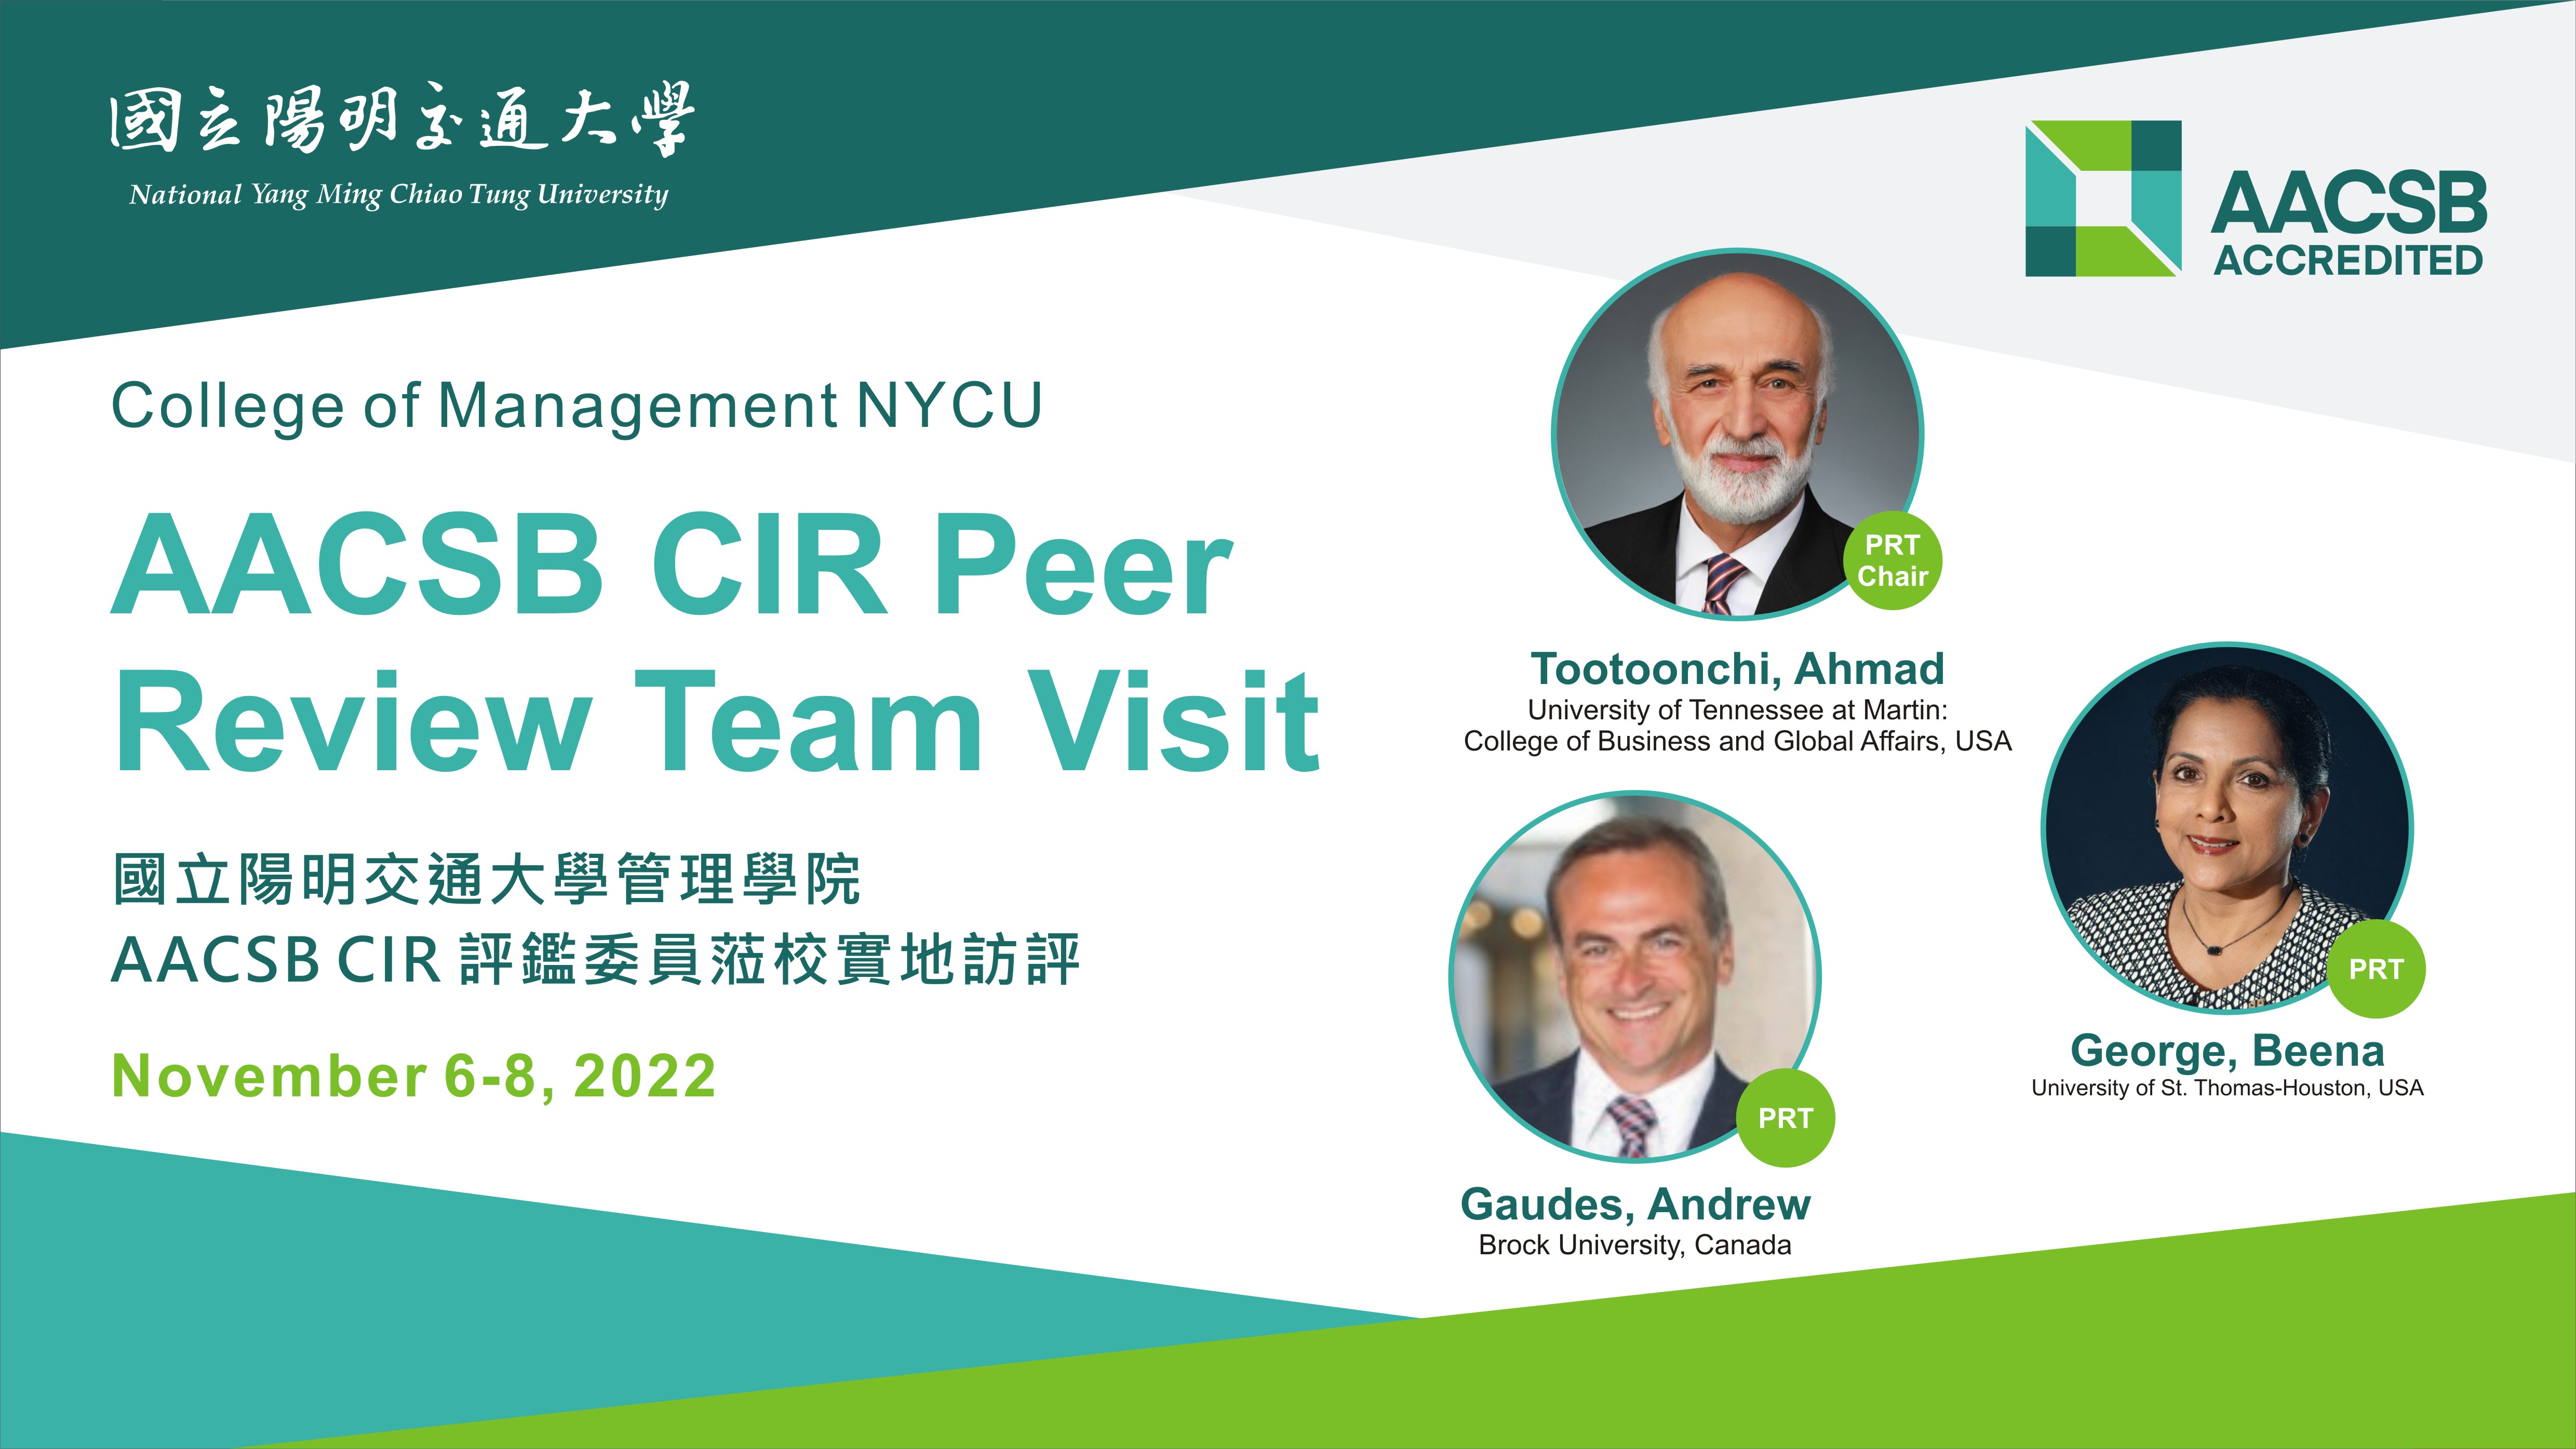 2022 Nov 6-8 AACSB Continuous Improvement Review Peer Review Team Visit to College of Management, NYCU